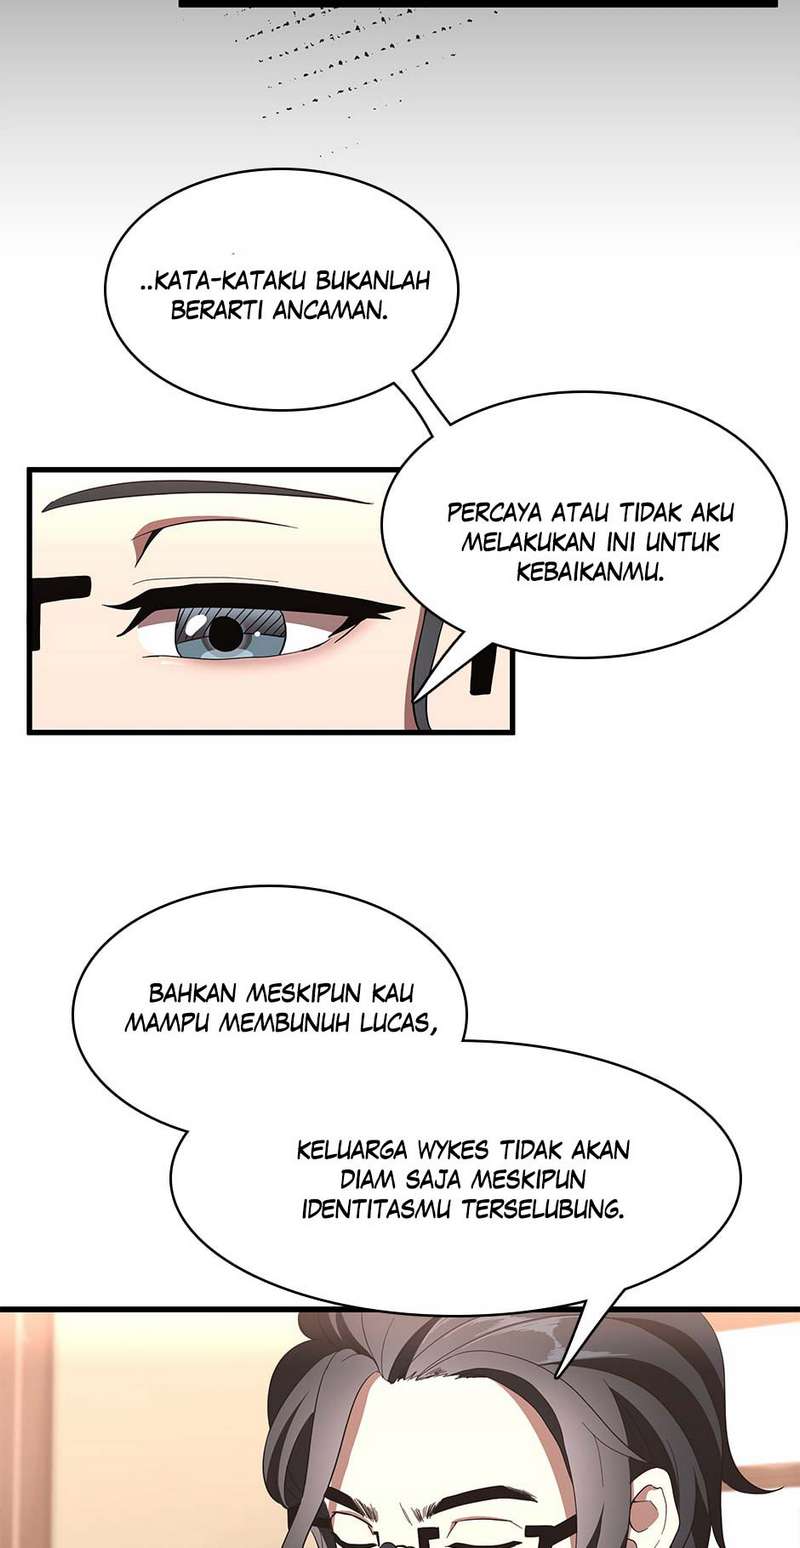 The Beginning After the End Chapter 72